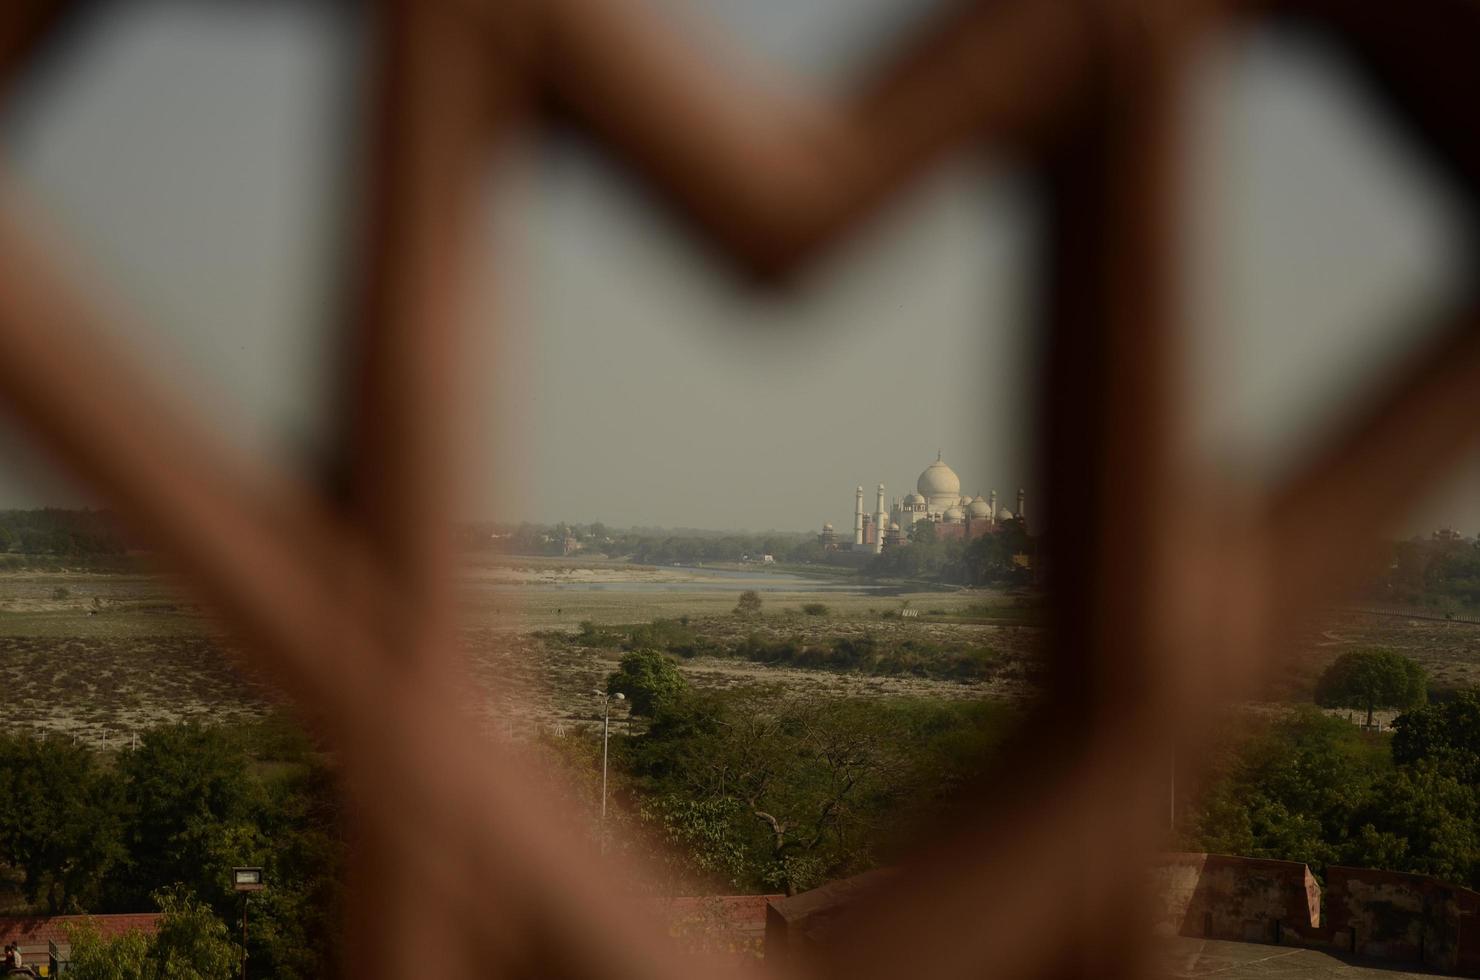 The letter M foreshadows the beautiful Taj Mahal, it is reminiscent of how an exiled man was longing for his own love from a distance as he was put in isolation. photo